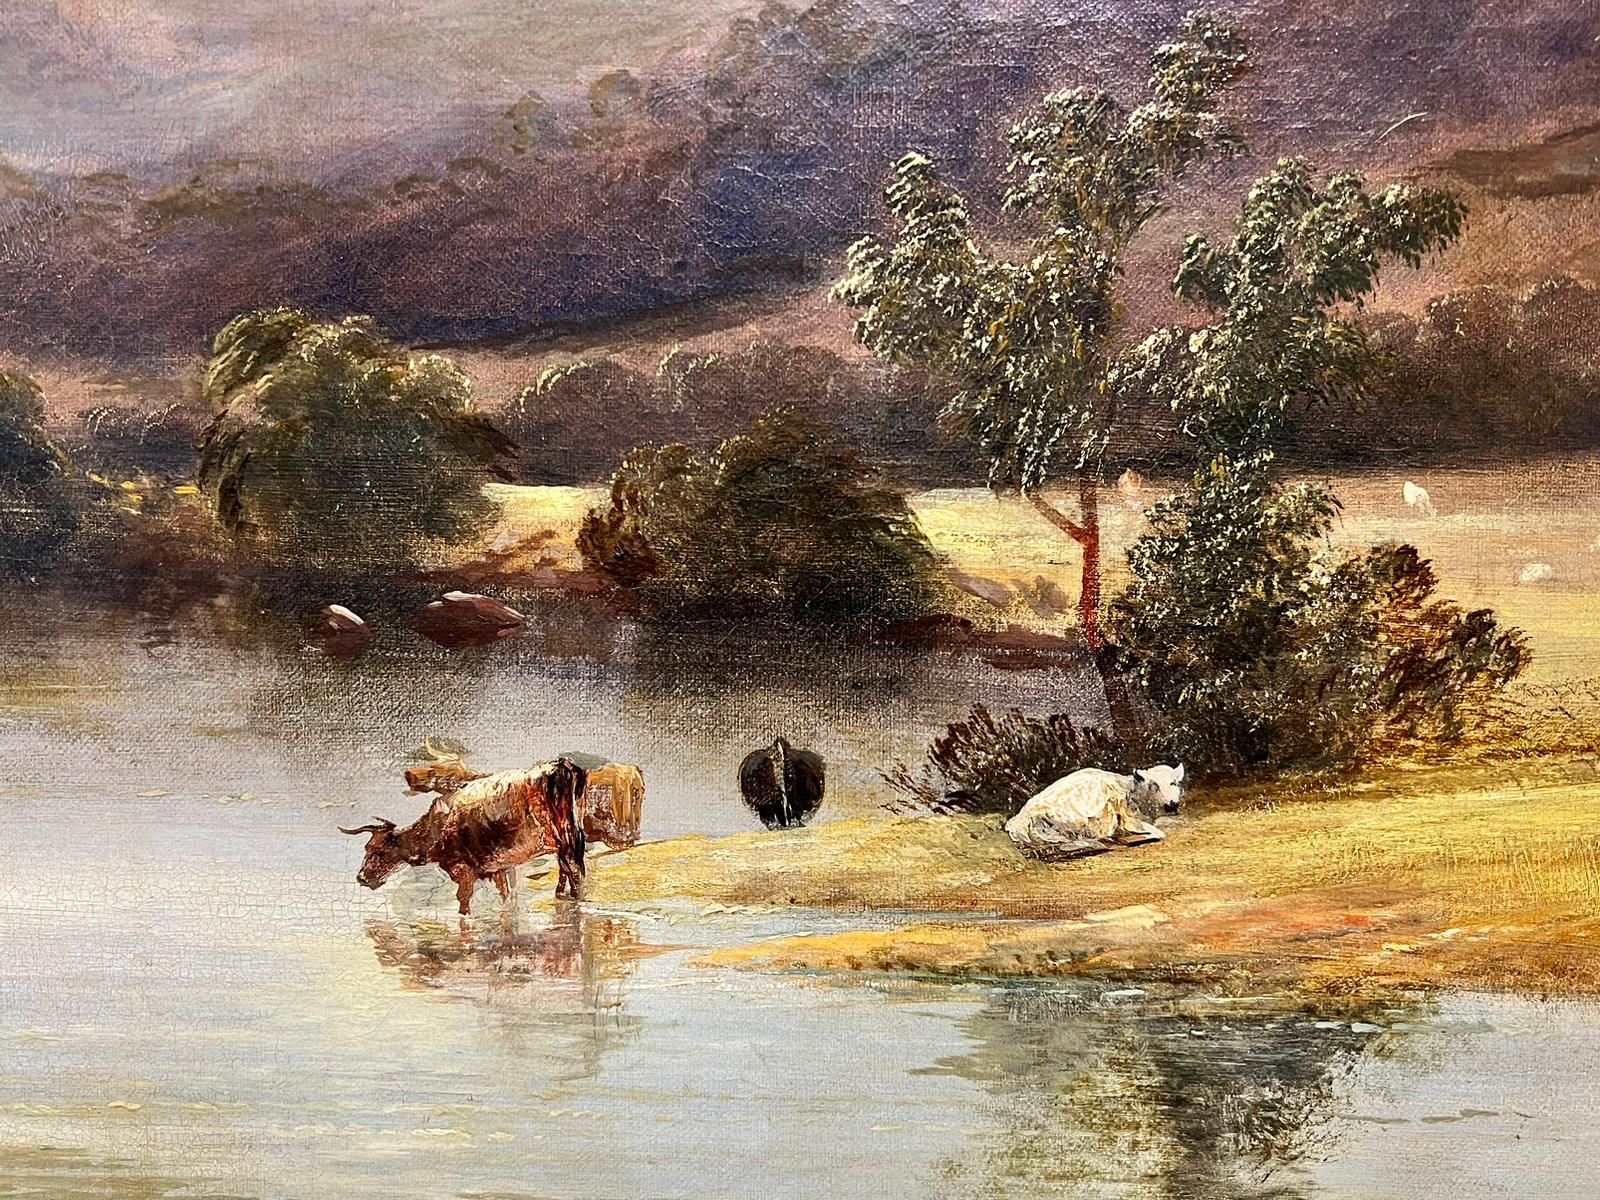 Artist/ School: Scottish School, 19th century

Title: Scottish Highland Landscape, with cattle watering on the loch

Medium: oil on canvas, framed

Framed: 39 x 46 inches
Painting: 28 x 36 inches

Provenance: private collection, UK

Condition: The